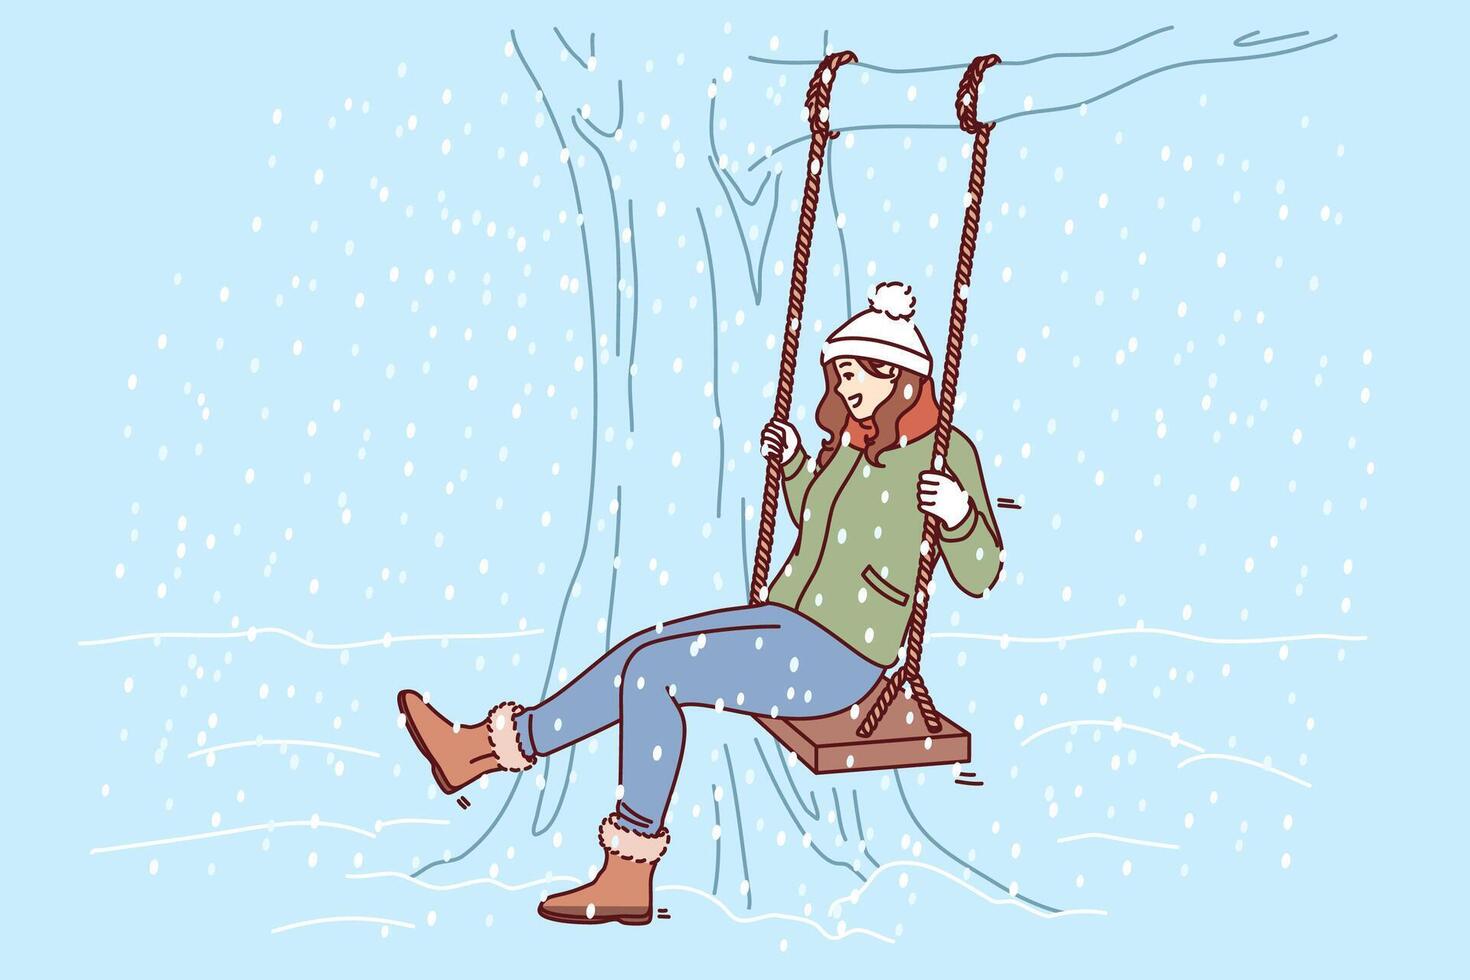 Woman swings on swing in winter park, rejoicing at falling snow and approach christmas or new year vector